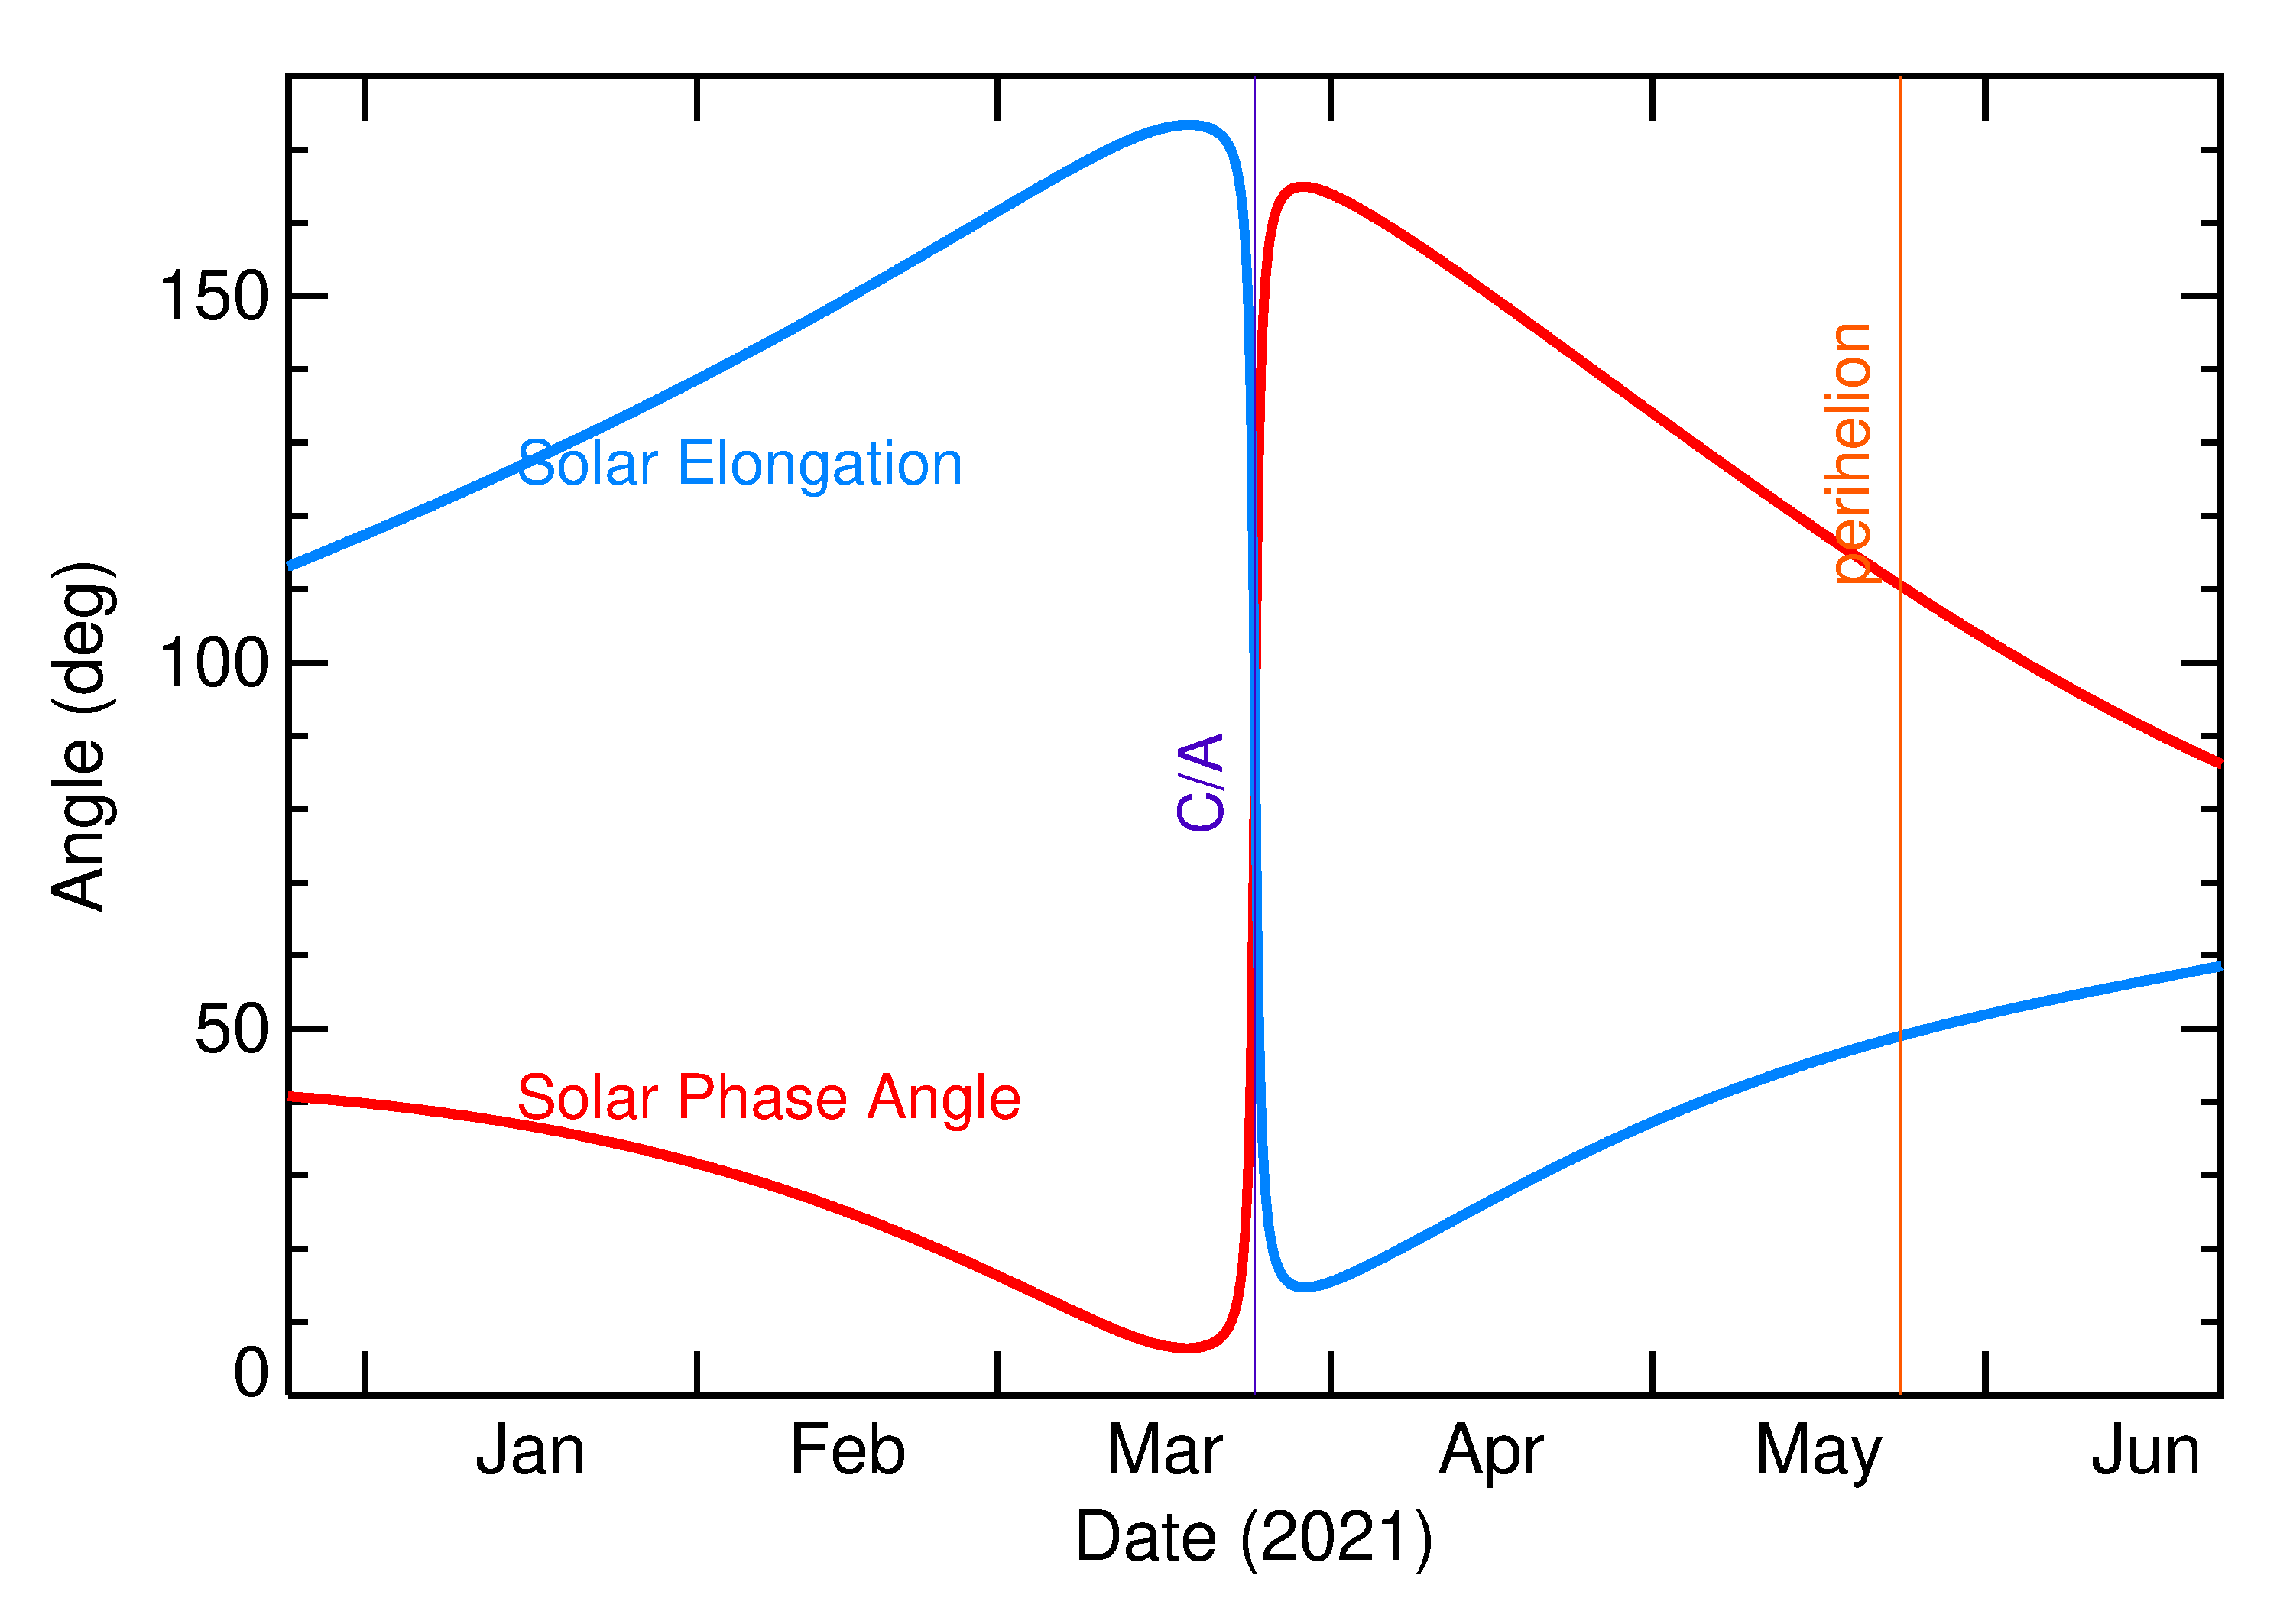 Solar Elongation and Solar Phase Angle of 2021 FP2 in the months around closest approach